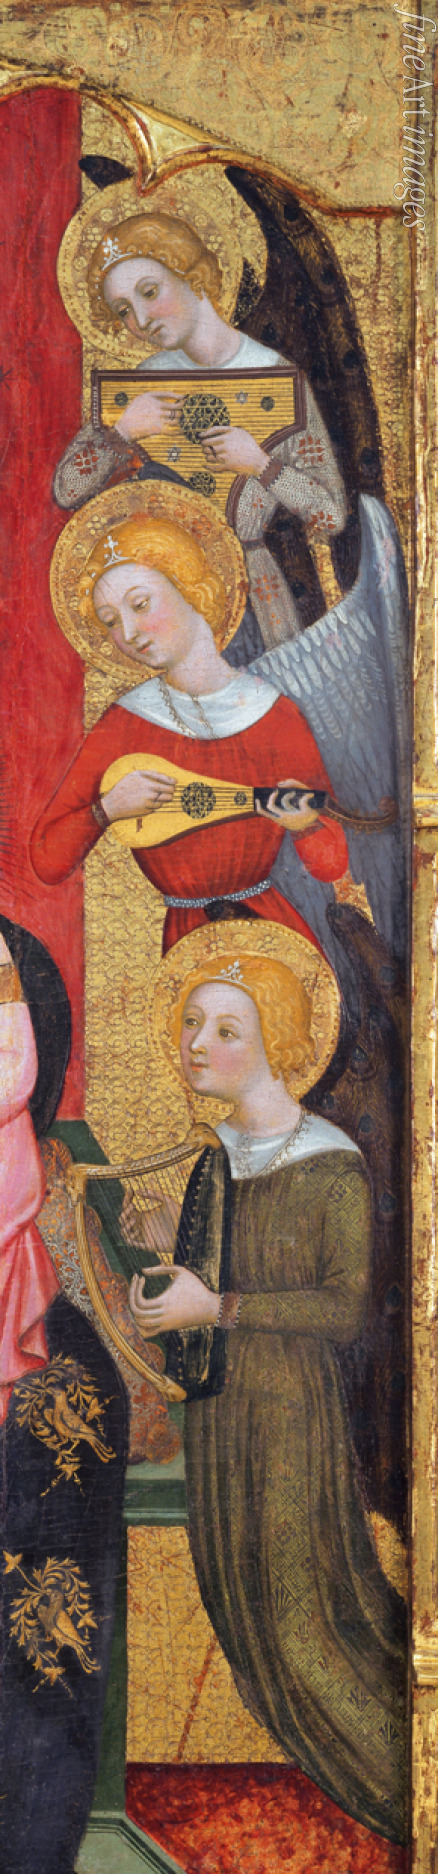 Serra Pere - Madonna with Angels Playing Music (Detail)